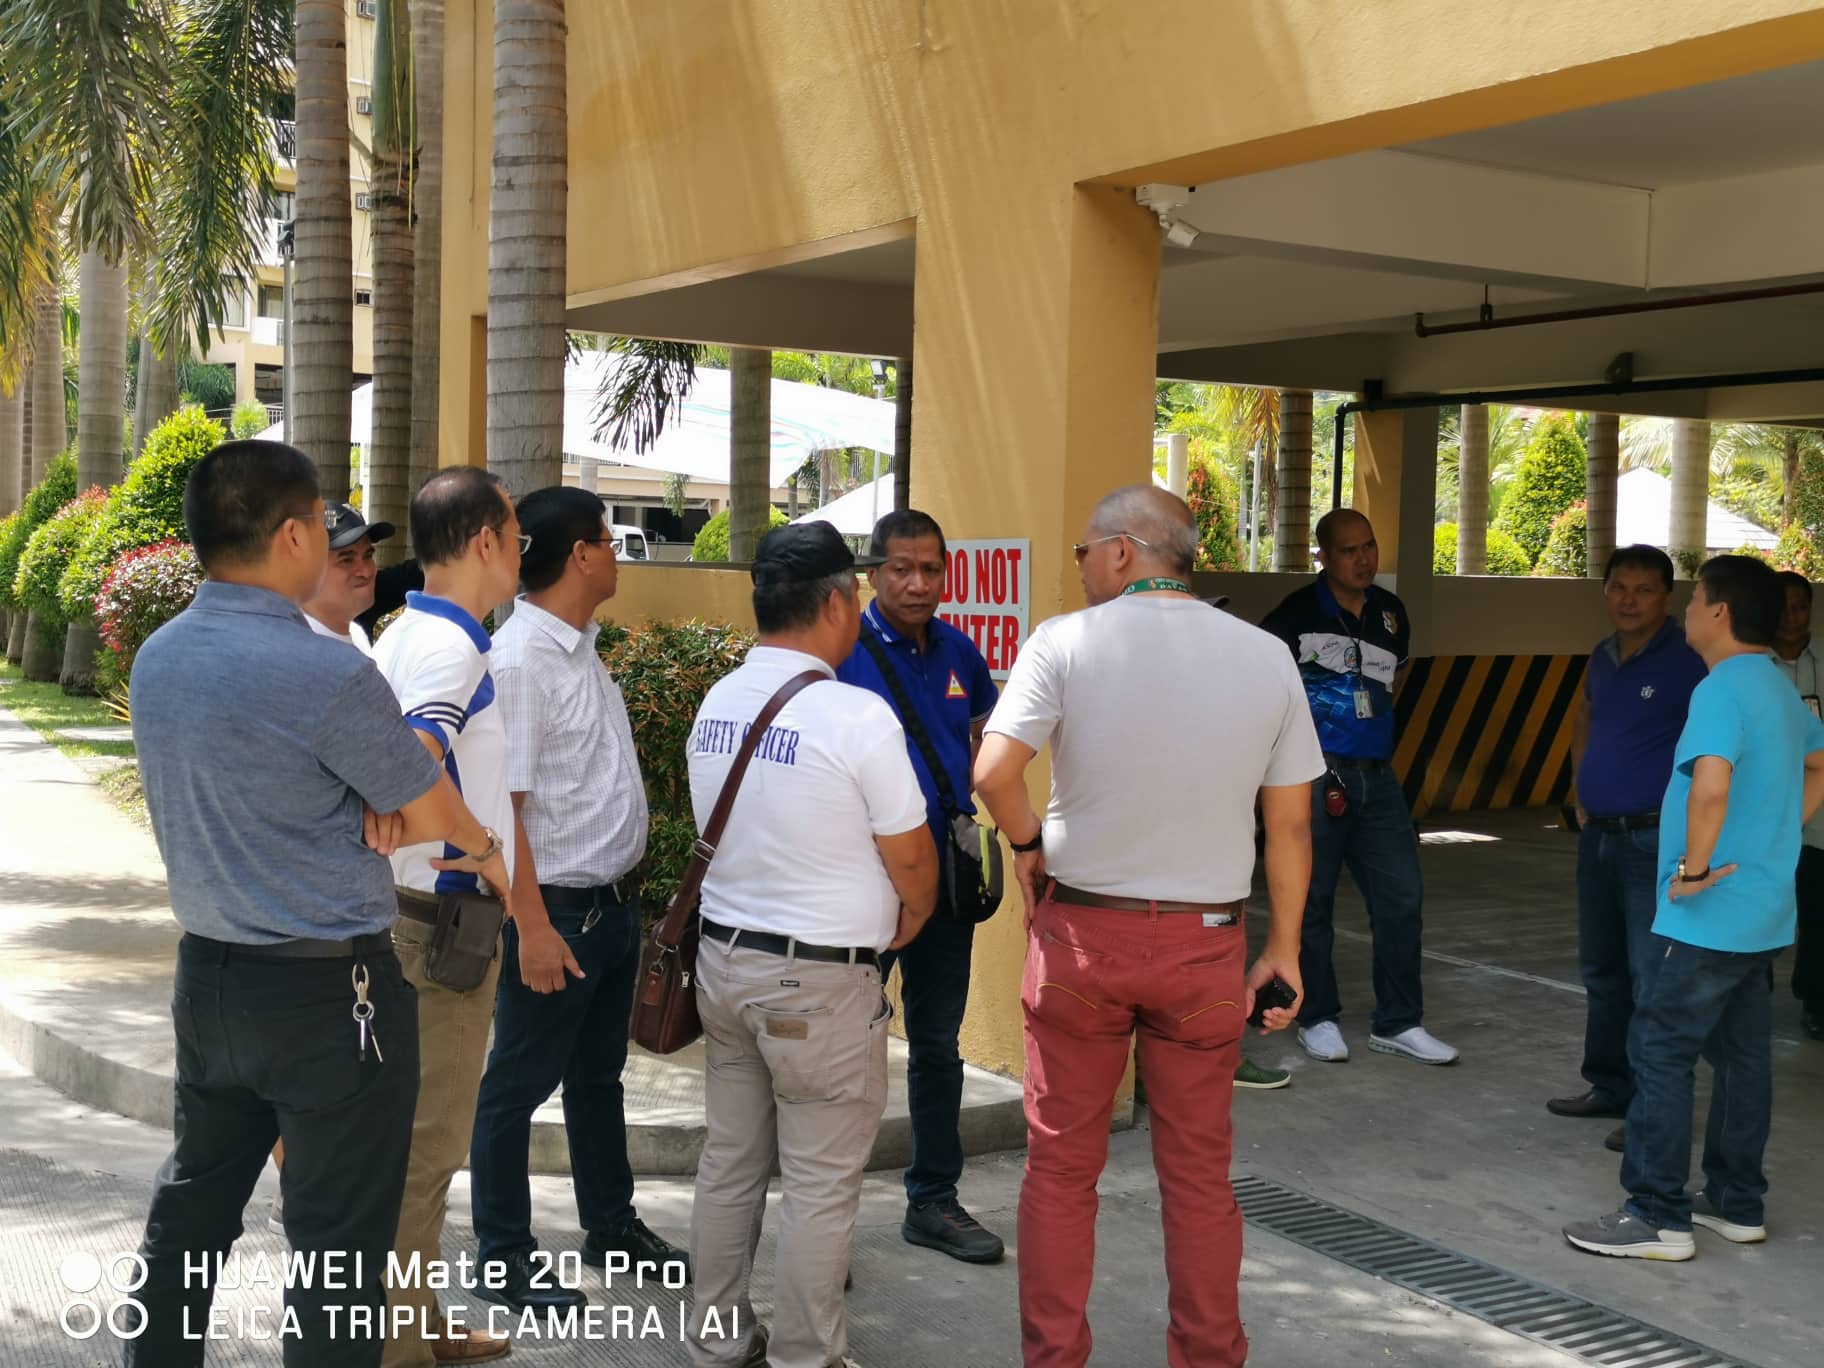 Building inspection and assessment, together with CDRRMO, Central 911 and City Engineers Office. After the earthquake incident on October 31, 2019.